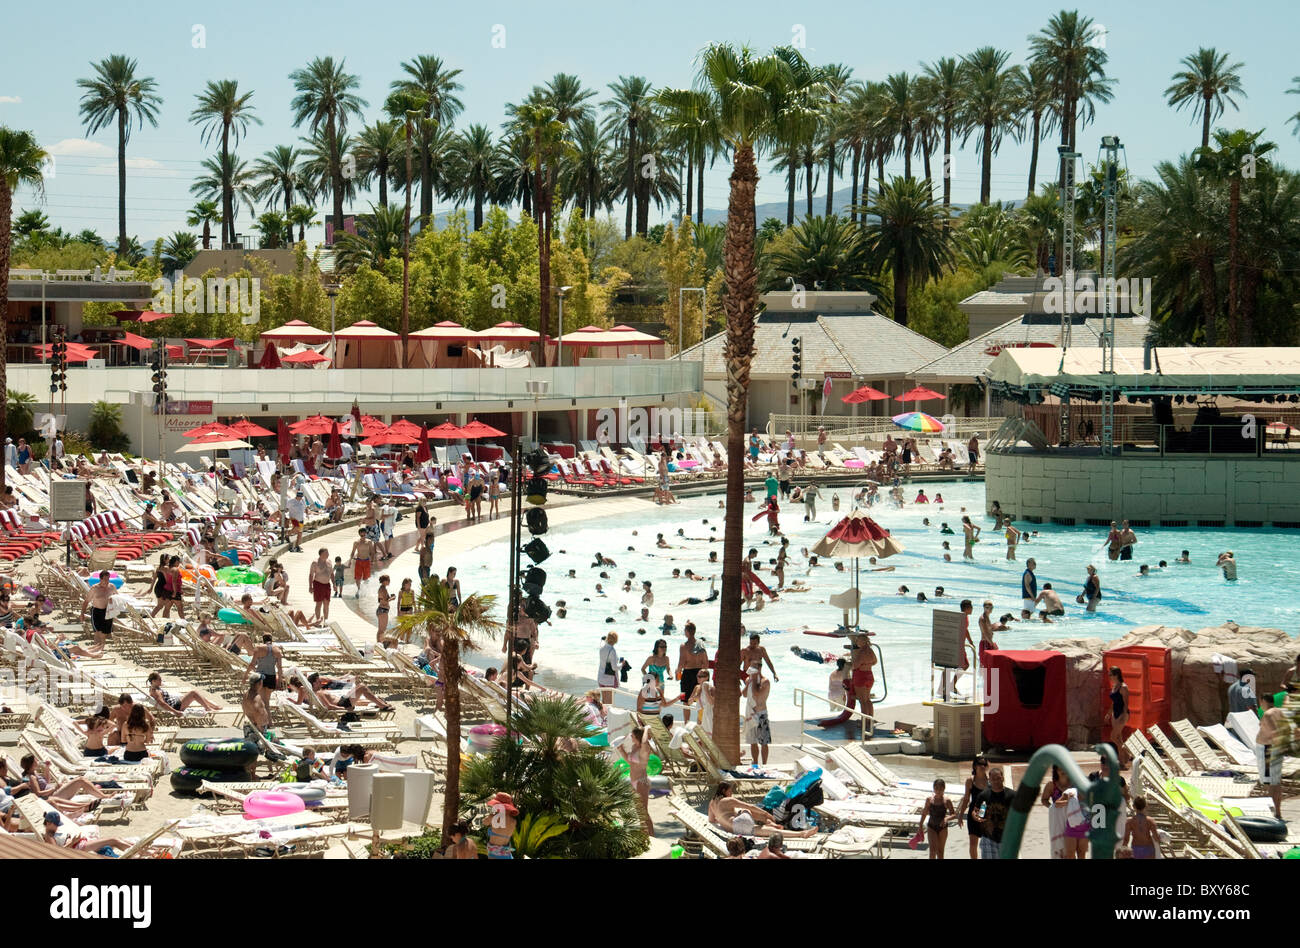 The artificial beach at the Mandalay Bay Hotel, the strip, Las